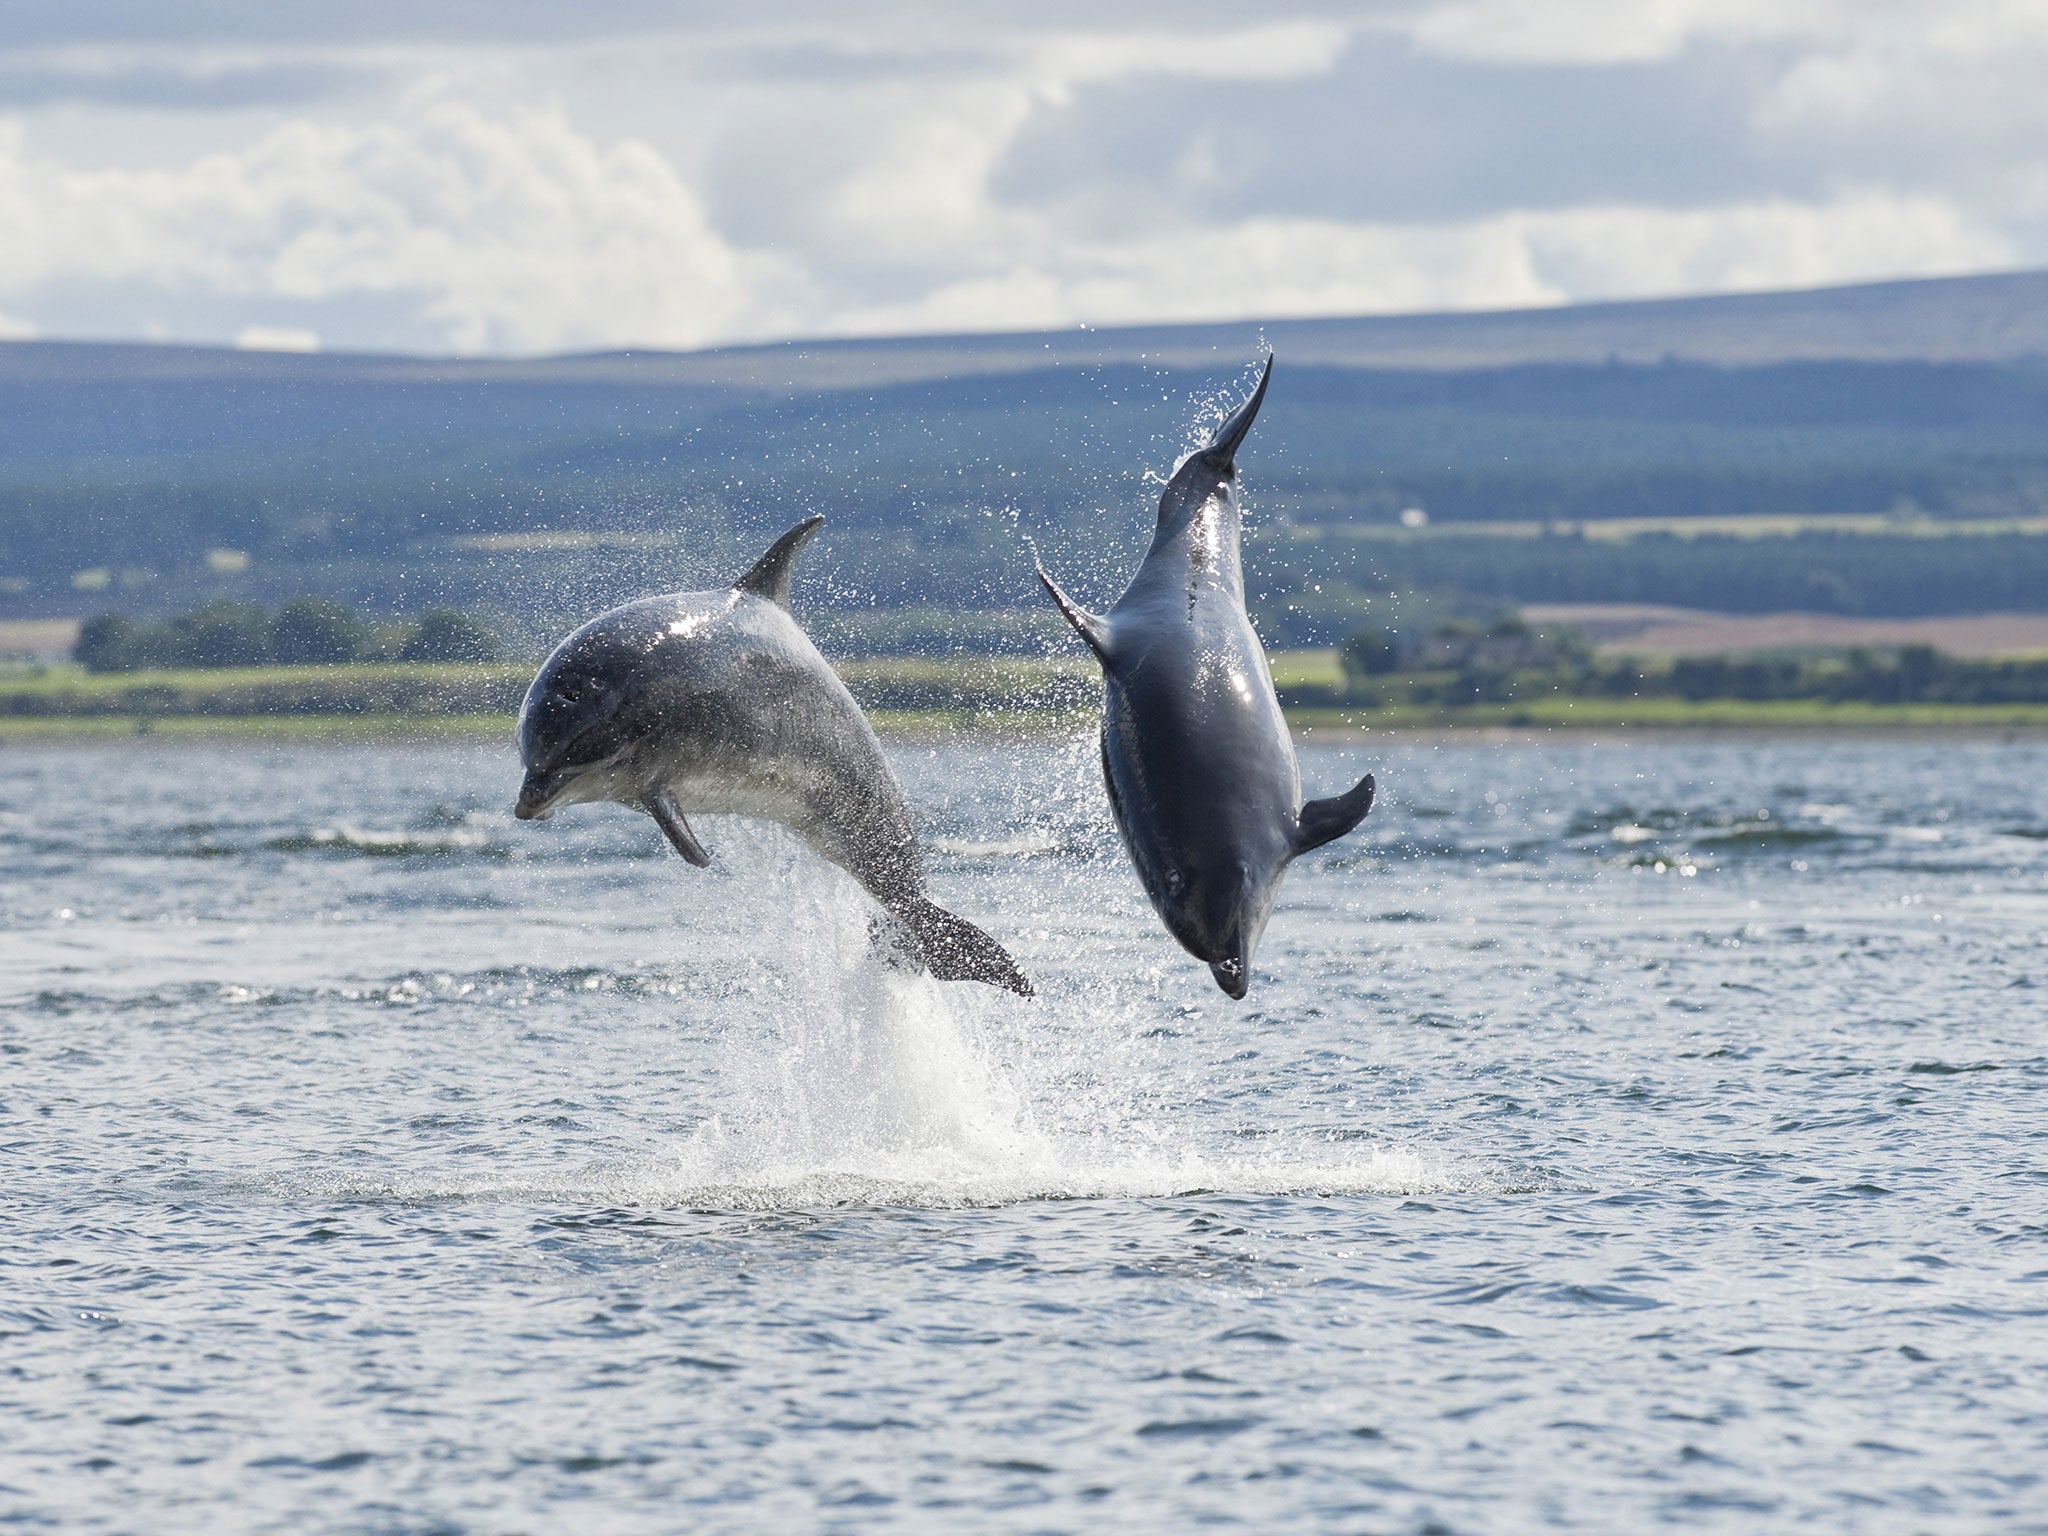 Species seen in the UK such as the bottlenose dolphin could be in danger, warn nature groups